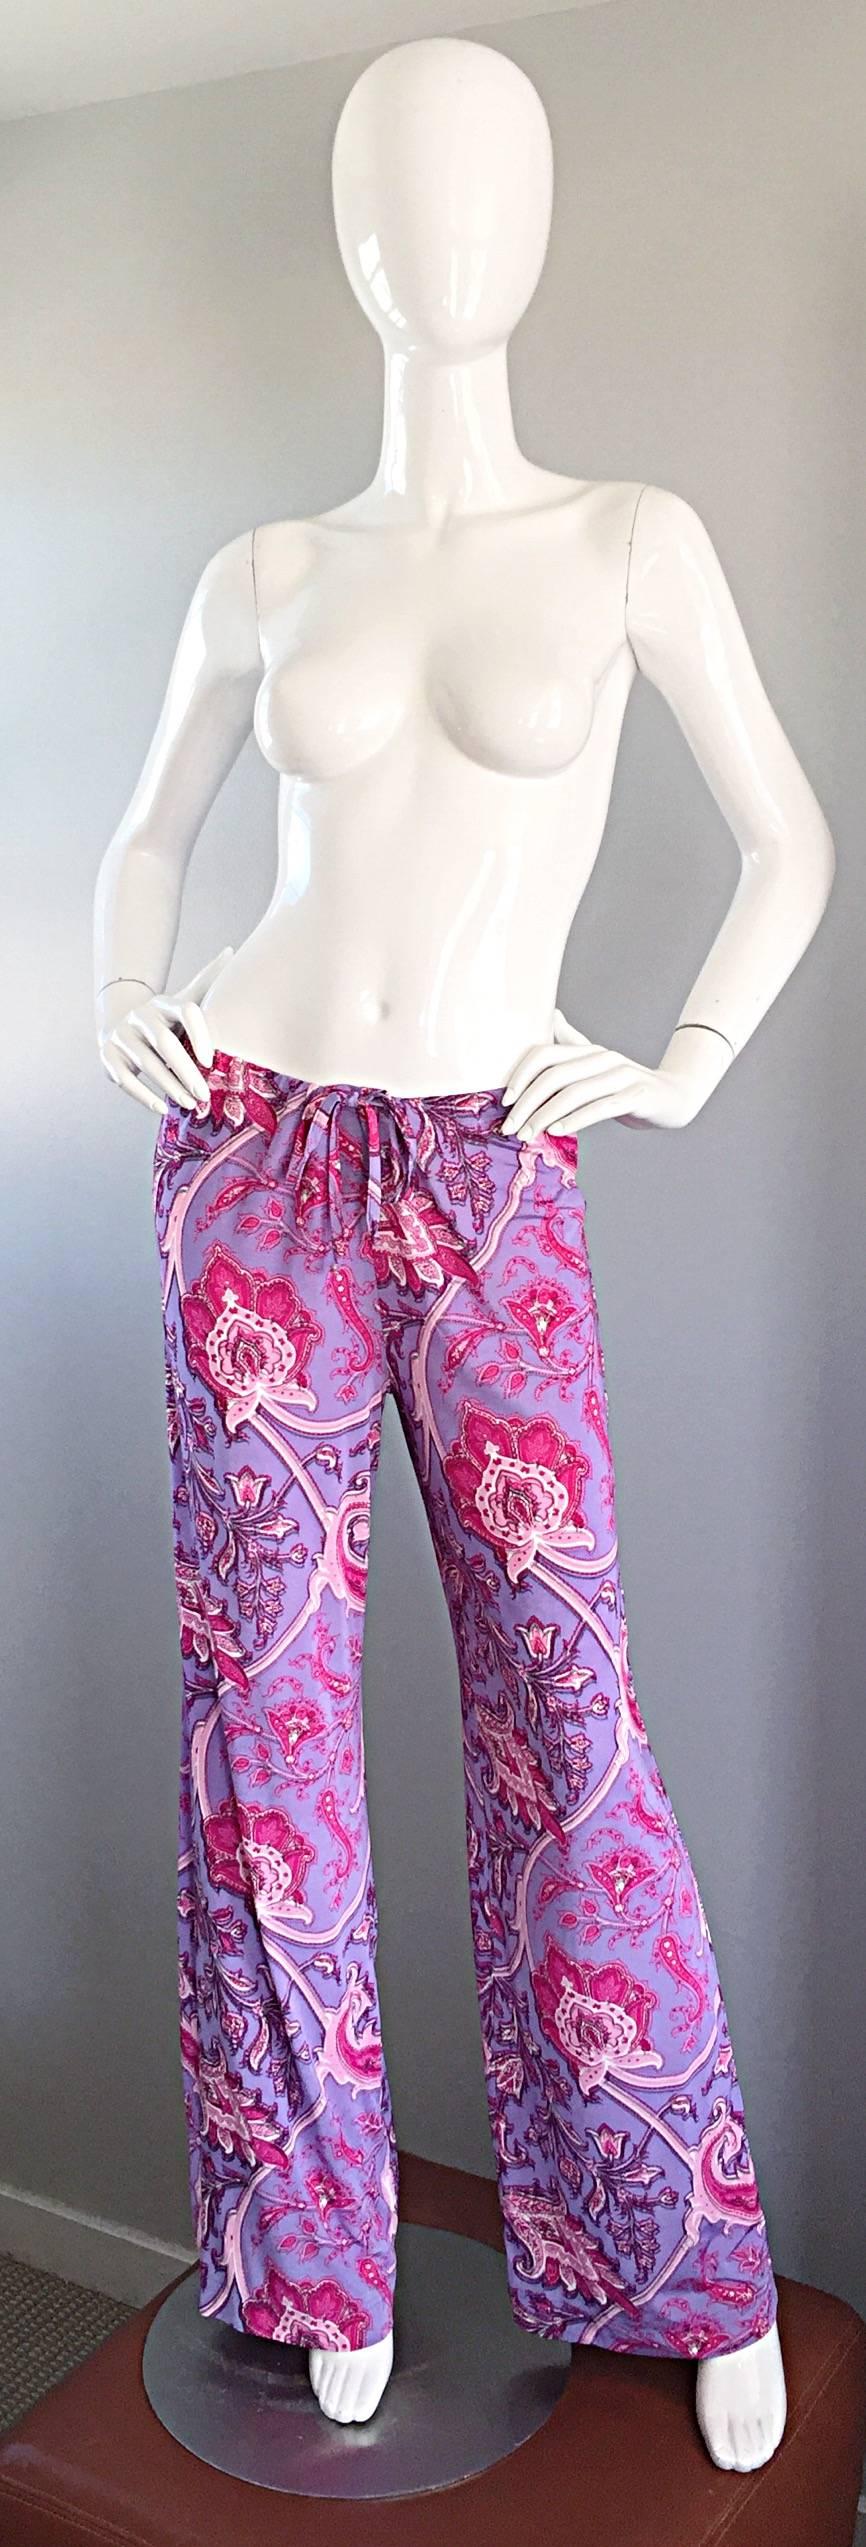 Amazing 1990s 90s ETRO vintage wide leg silk palazzo trousers! Amazing vibrant colors of lavender purples and fuchsia pinks in oversized paisley prints! 1970s / 70s feel! Drawstring waist can accommodate an array of sizes. Light and breezy that look